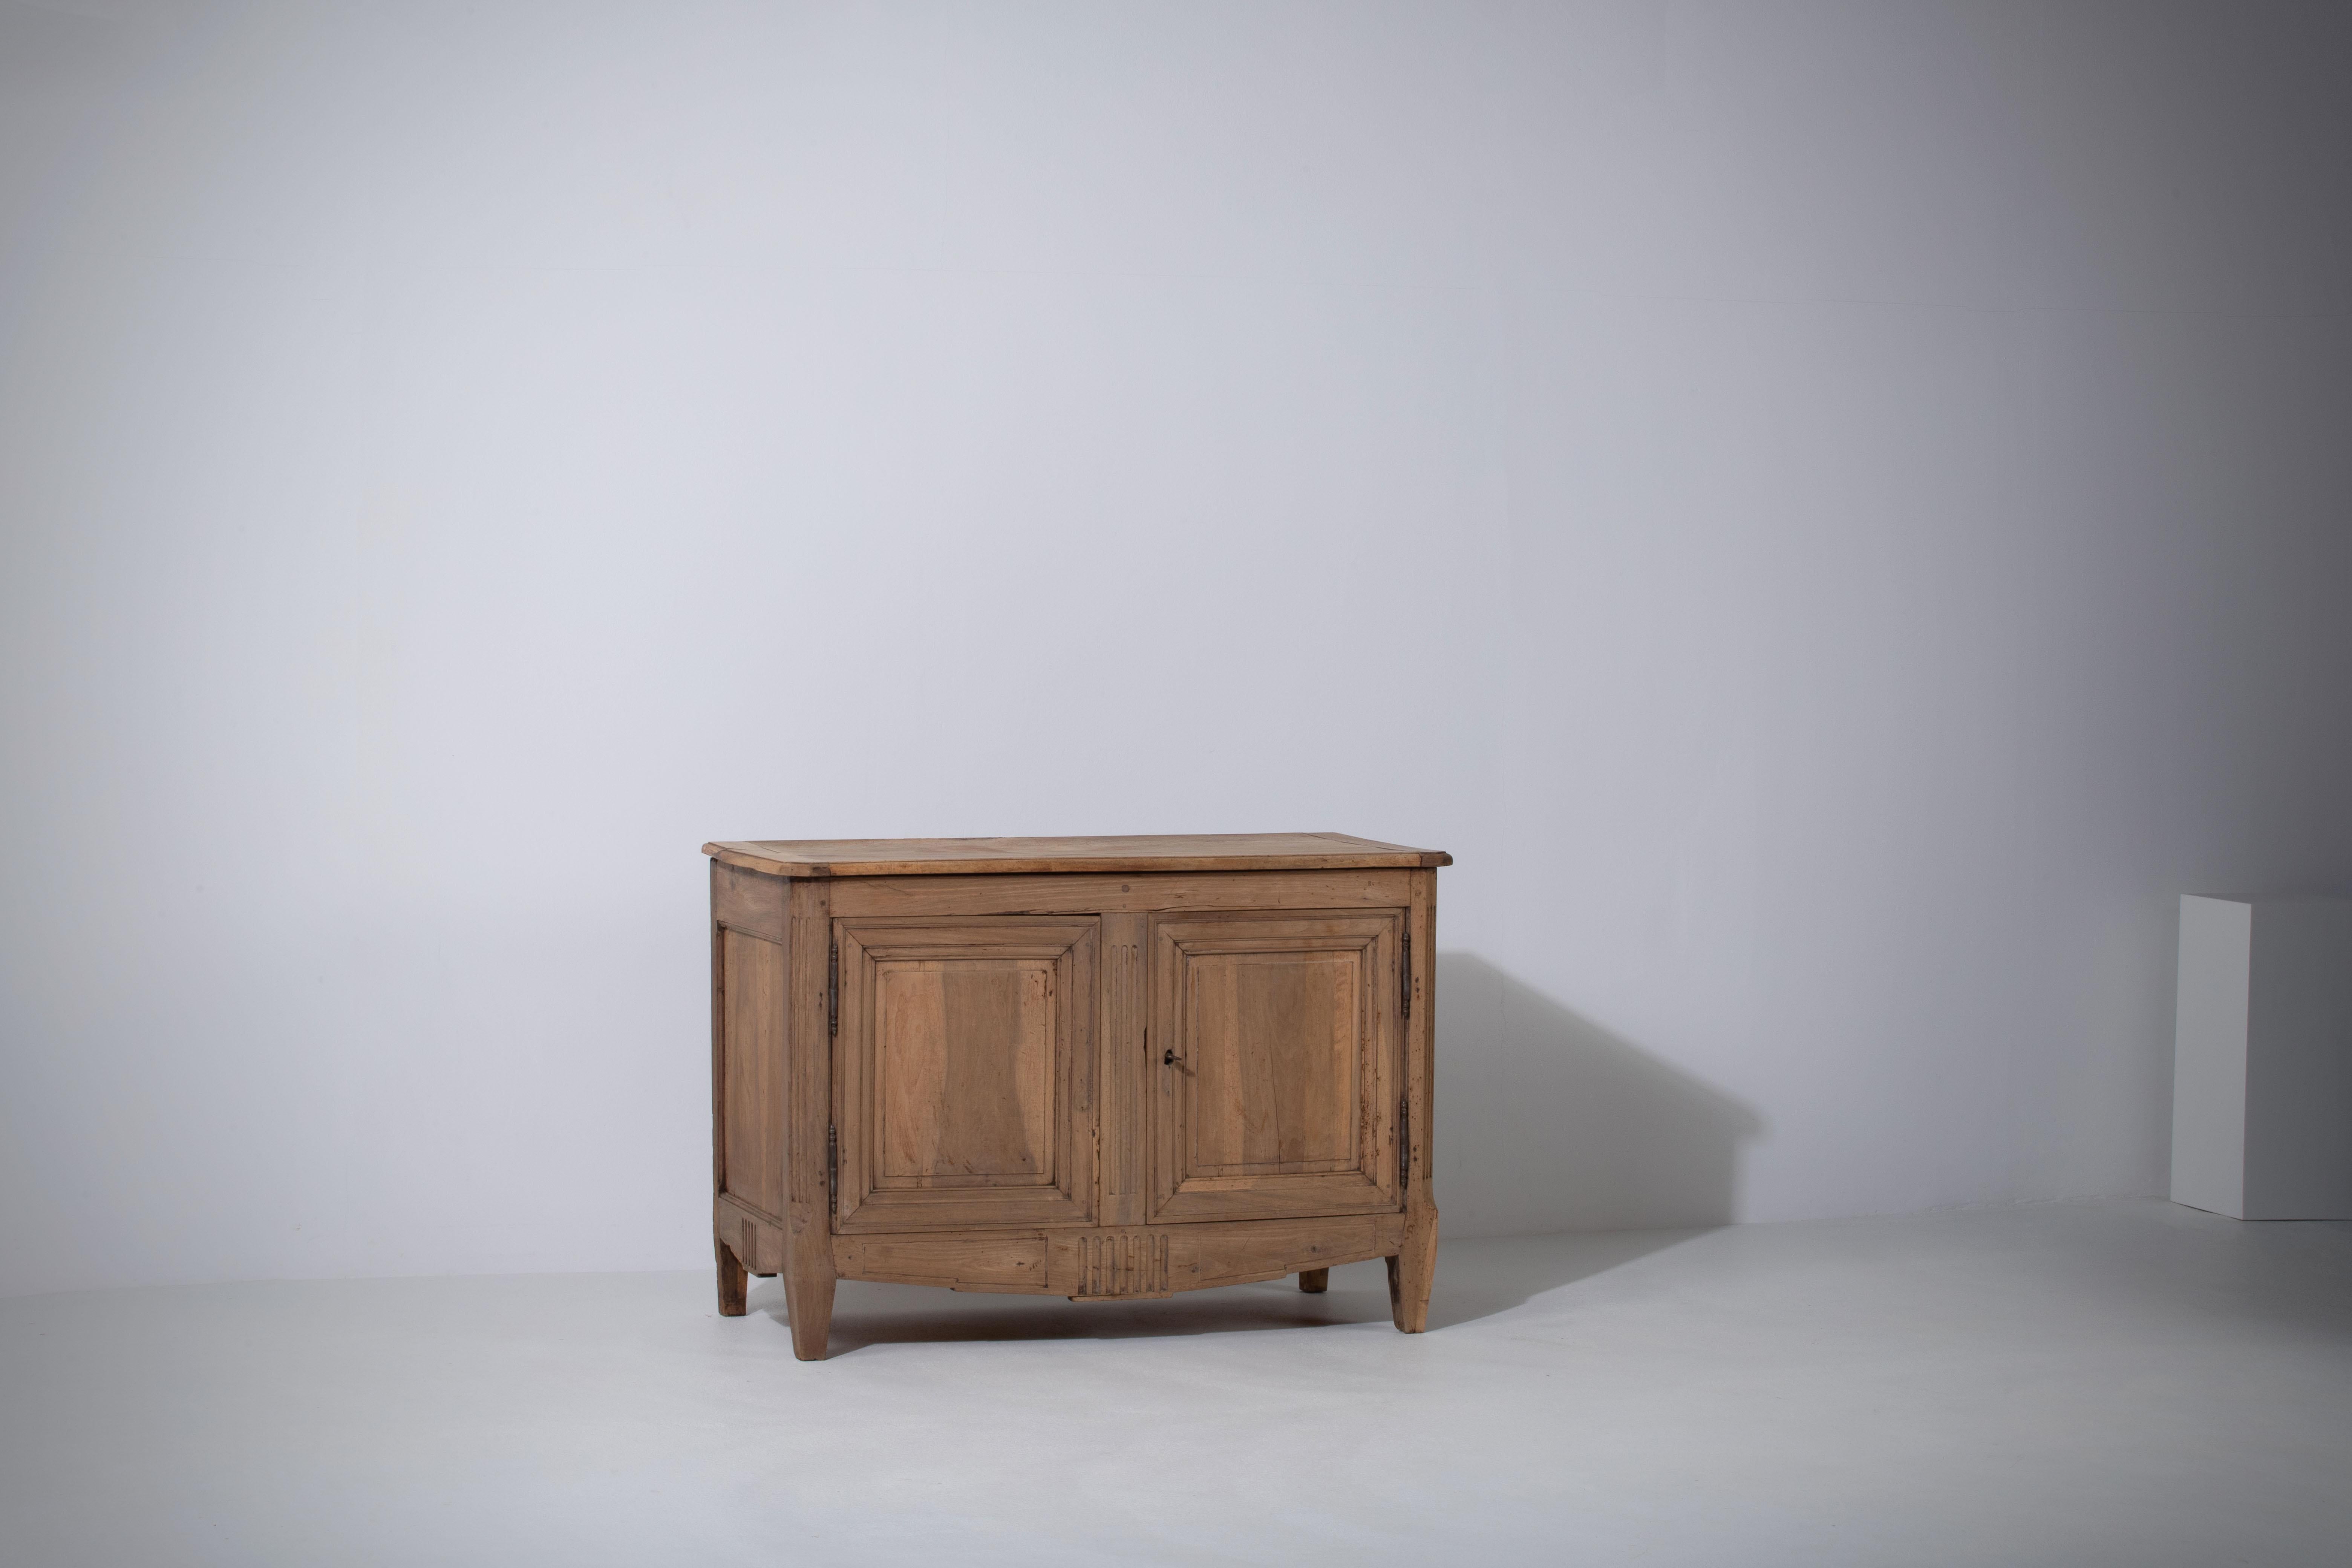 This magnificent Provencal cabinet from France is a true marvel of craftsmanship, rich with history and authentic charm. Dating back to circa 1890, this piece exudes the casual yet refined aesthetic of the French countryside and represents the